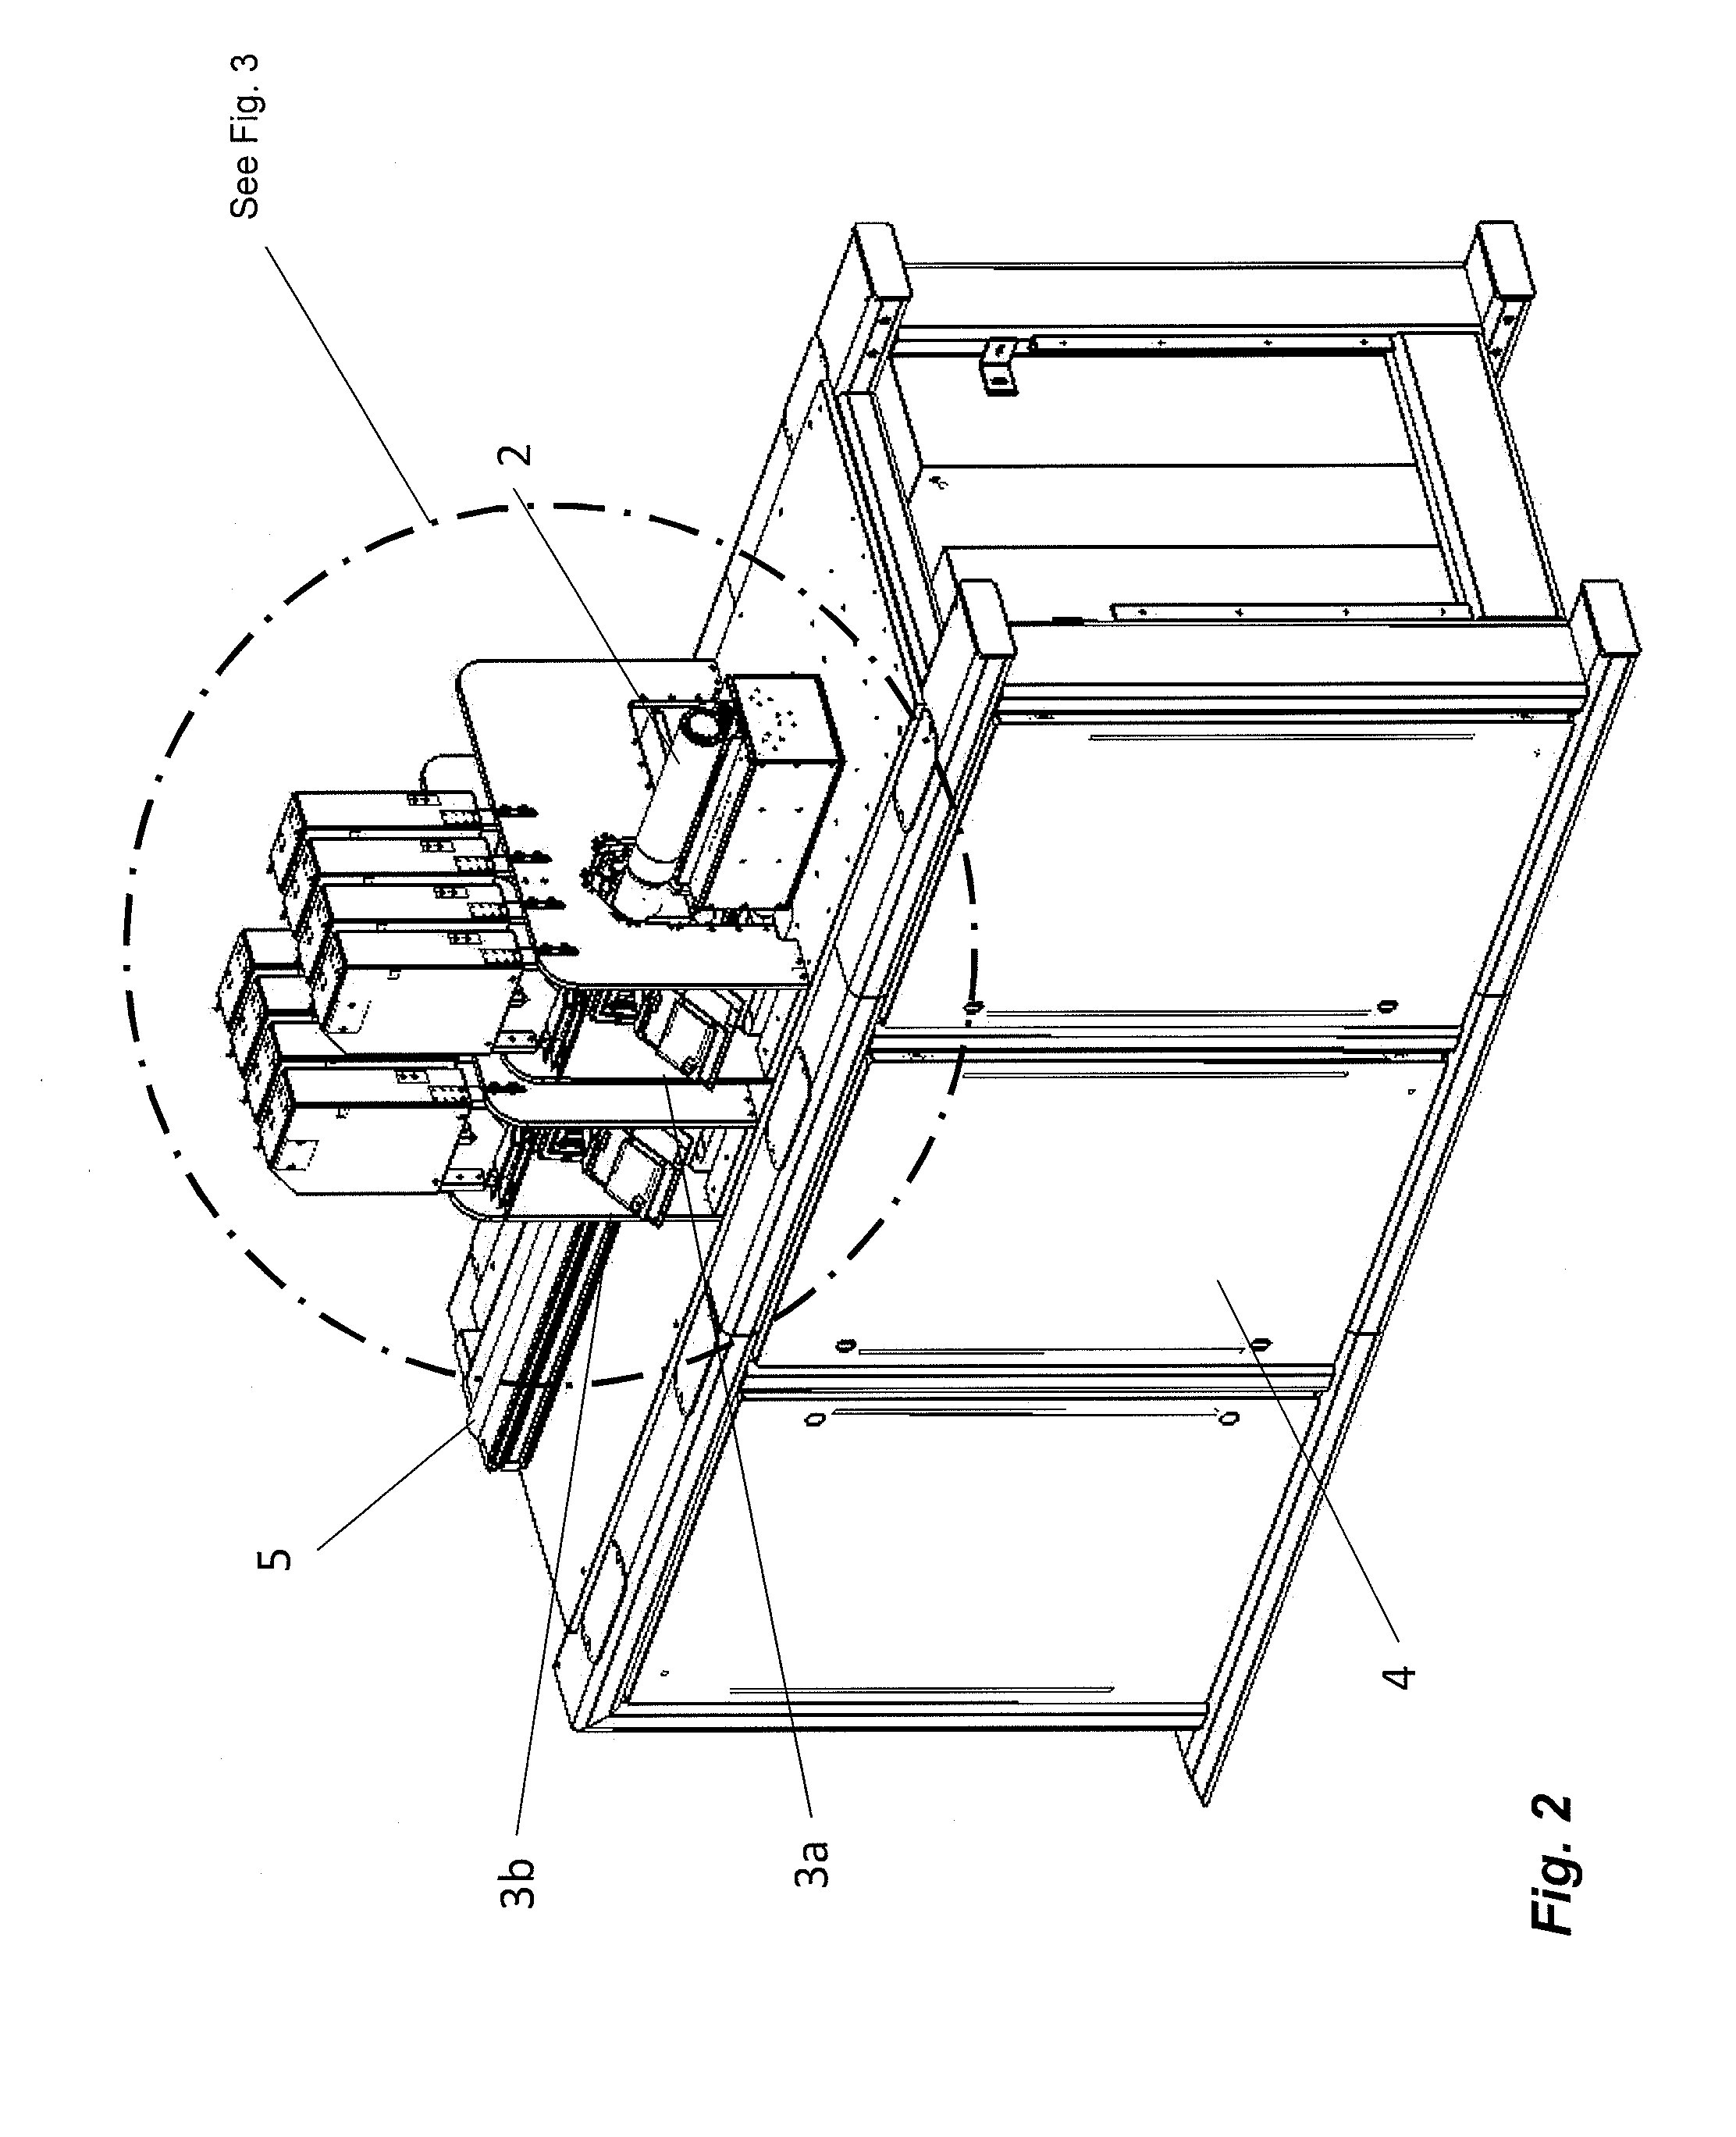 Apparatuses for Printing on Generally Cylindrical Objects and Related Methods